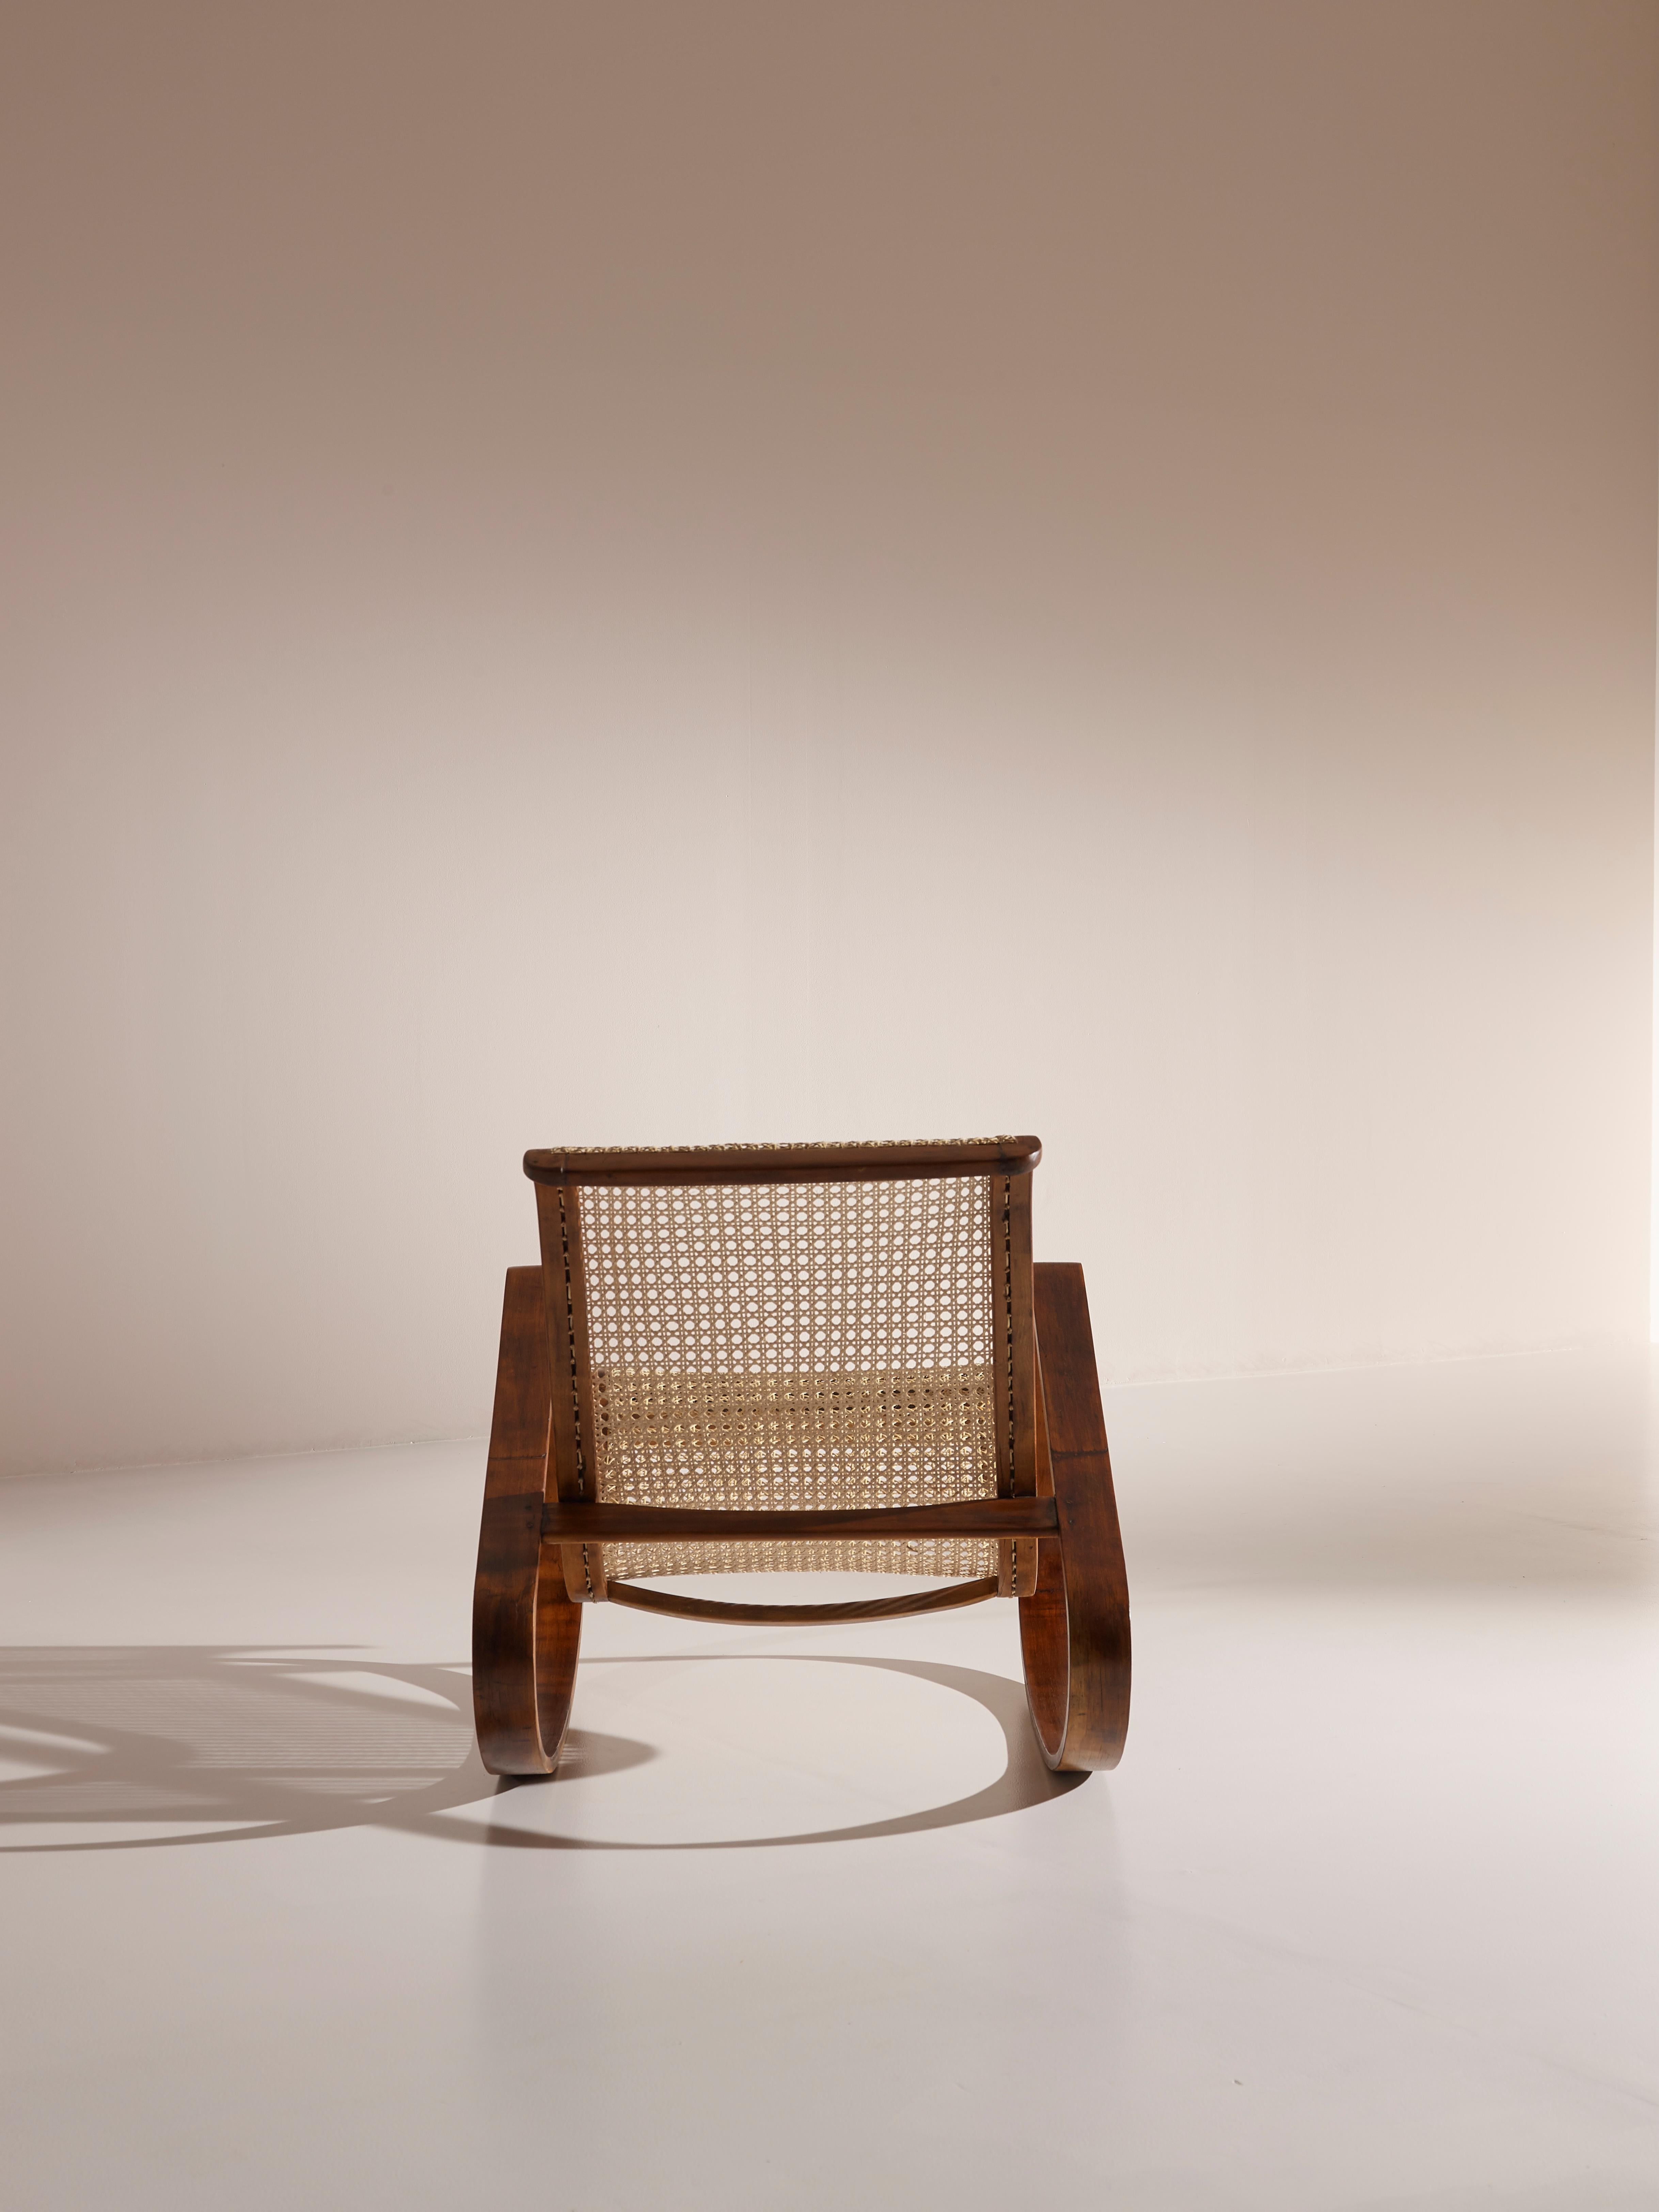 Caning Caned Rocking Chair Made by Porino, Italy, 1930s